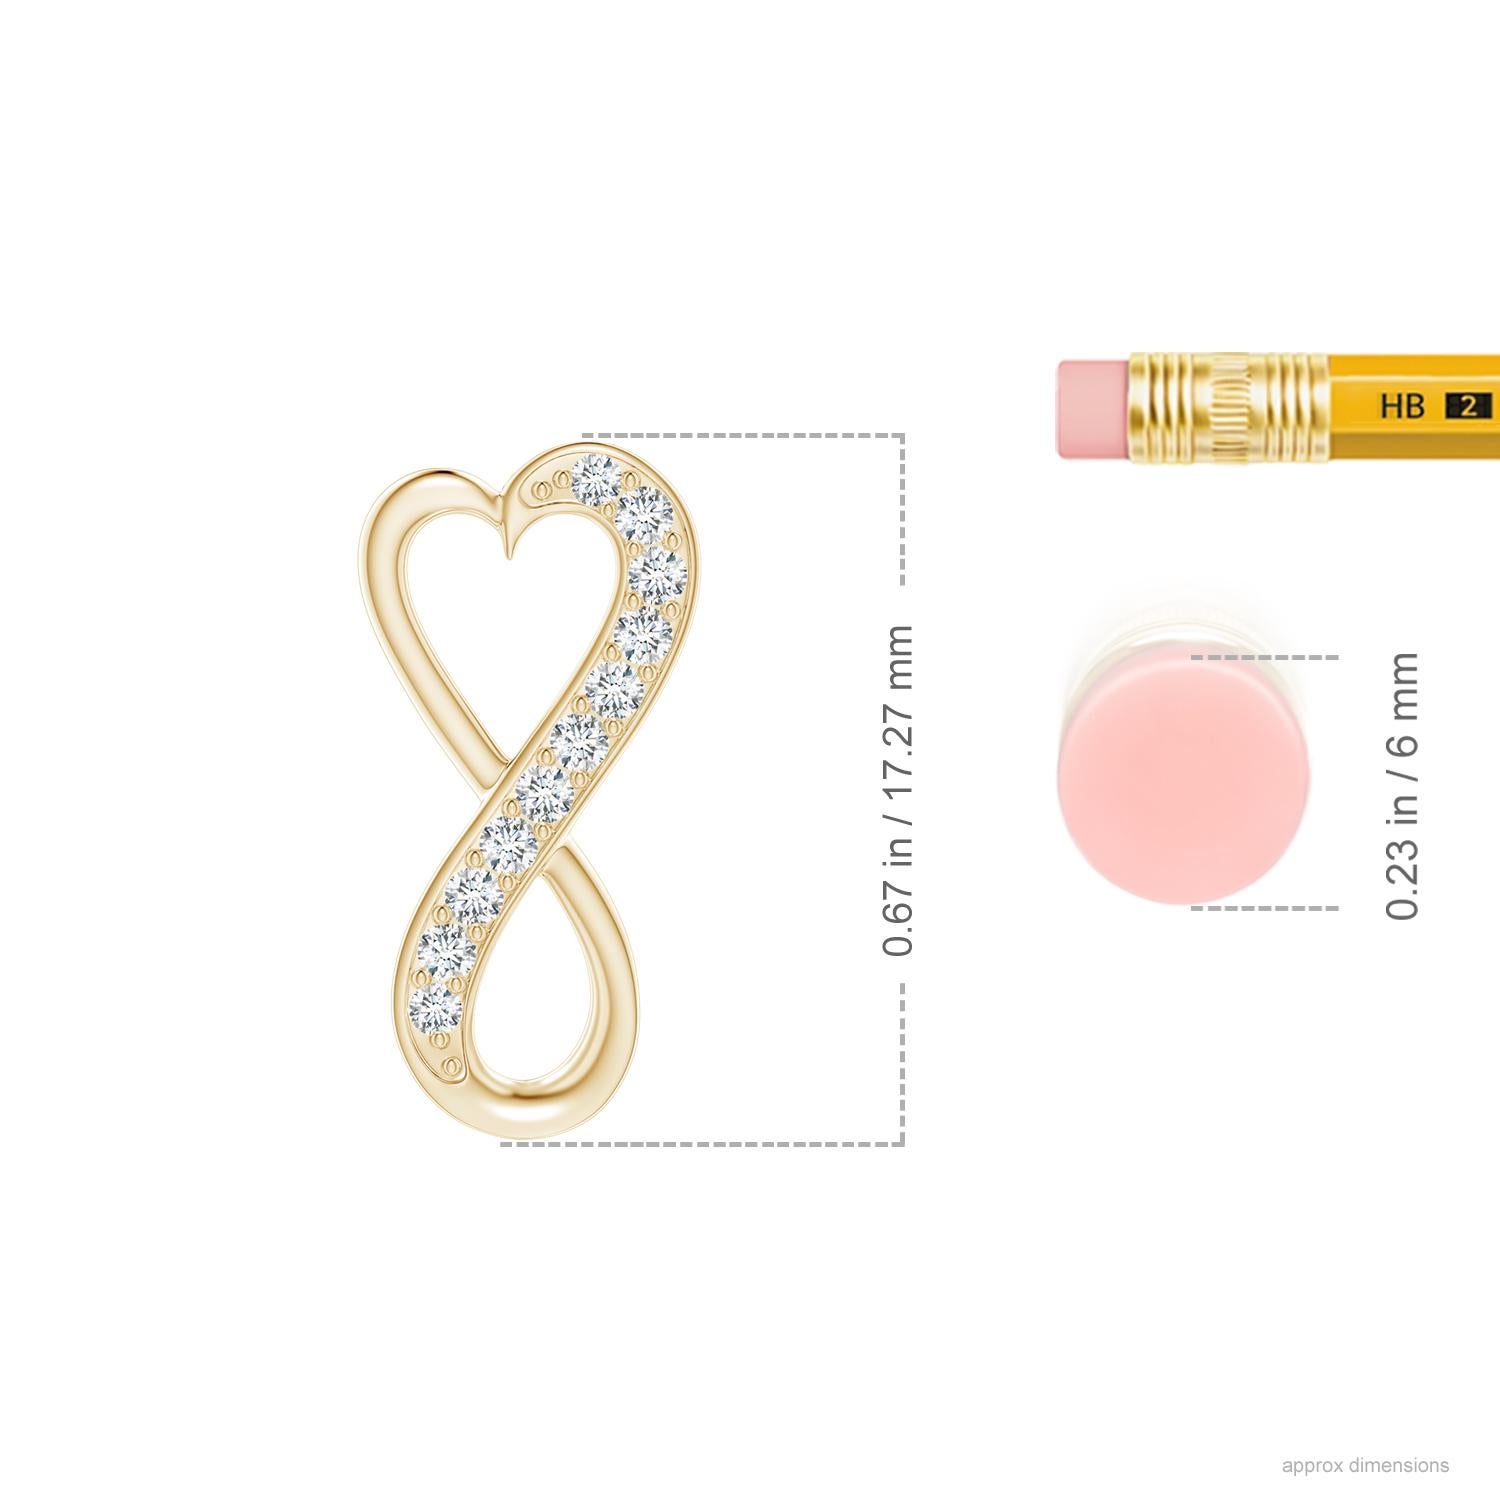 Designed with a hidden bale, this contemporary pendant features a heart frame that extends to form a stunning infinity. Shimmering diamonds partially accentuate the curves of this infinity heart pendant. It is skillfully crafted in 14k yellow